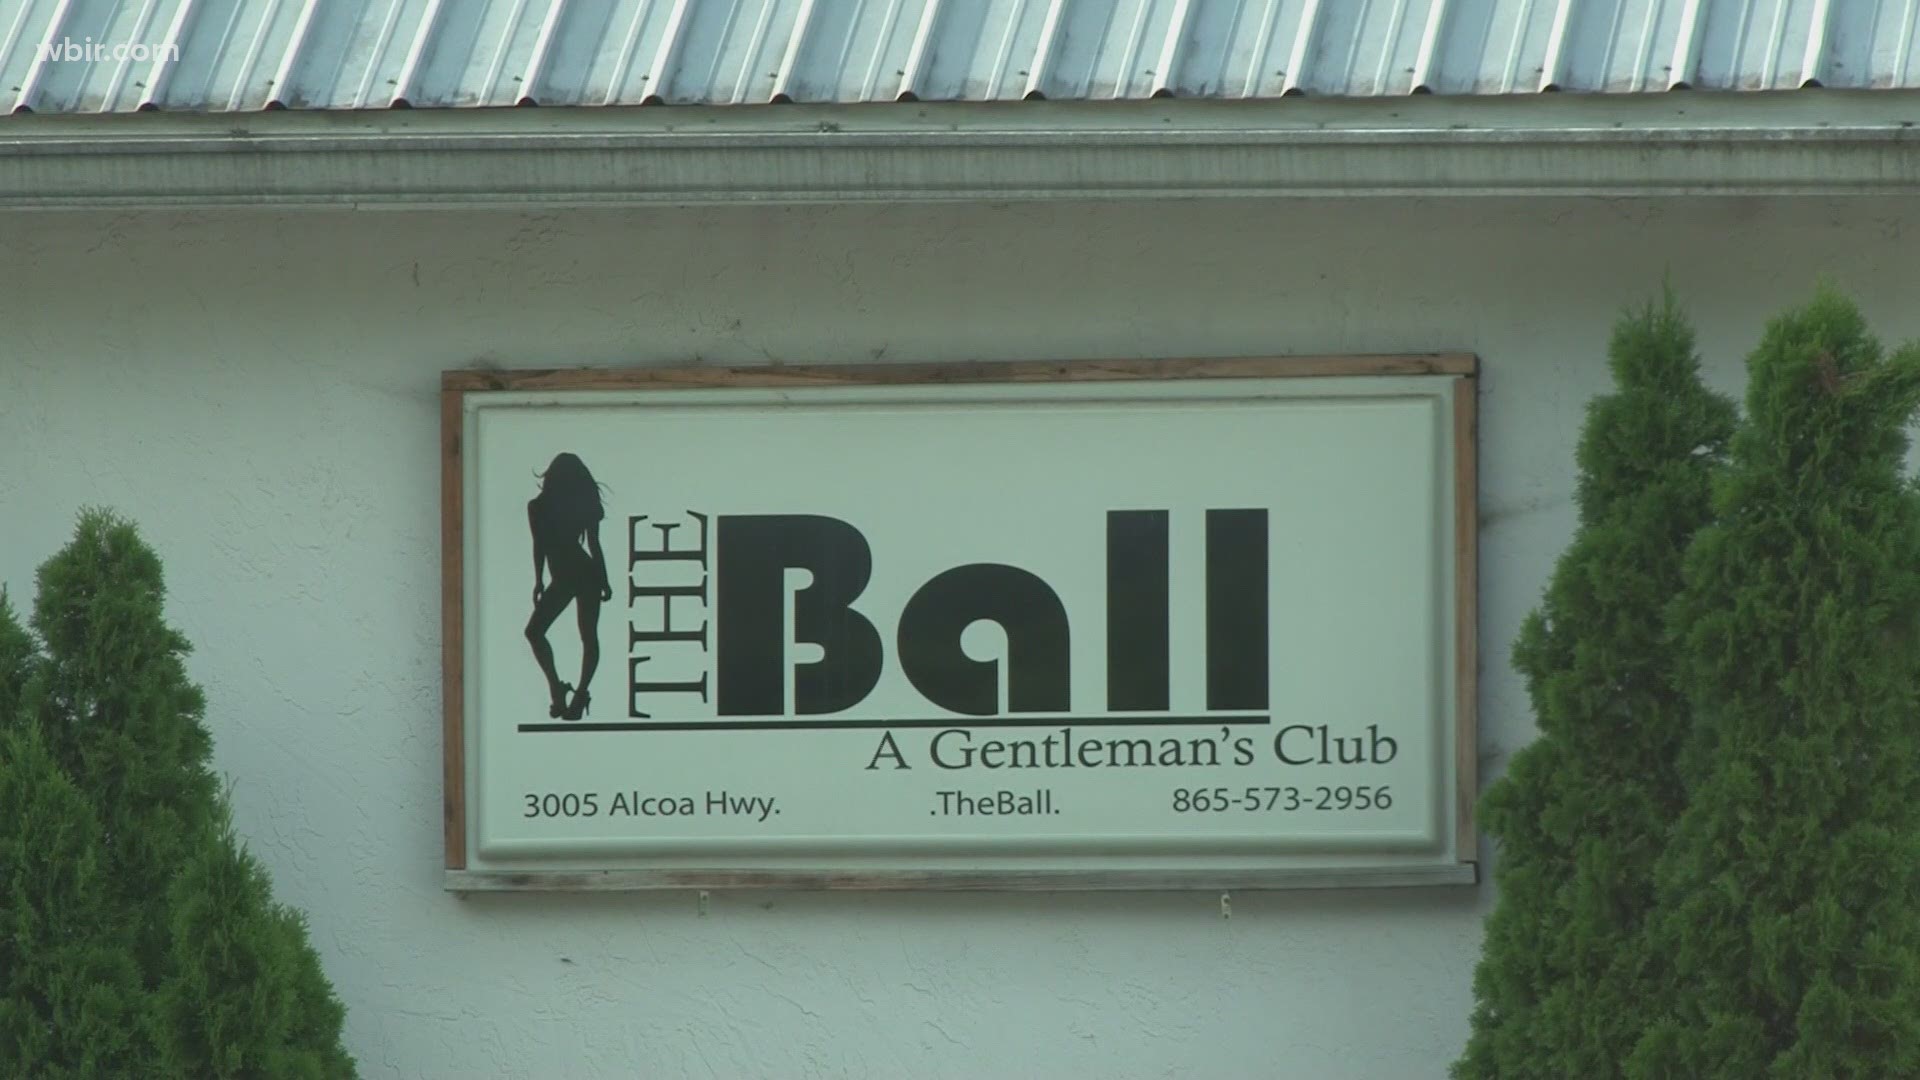 Documents from Knoxville Police show officers responded at least 20 times in the last 14 months to The Ball Gentleman's Club on Alcoa Highway.